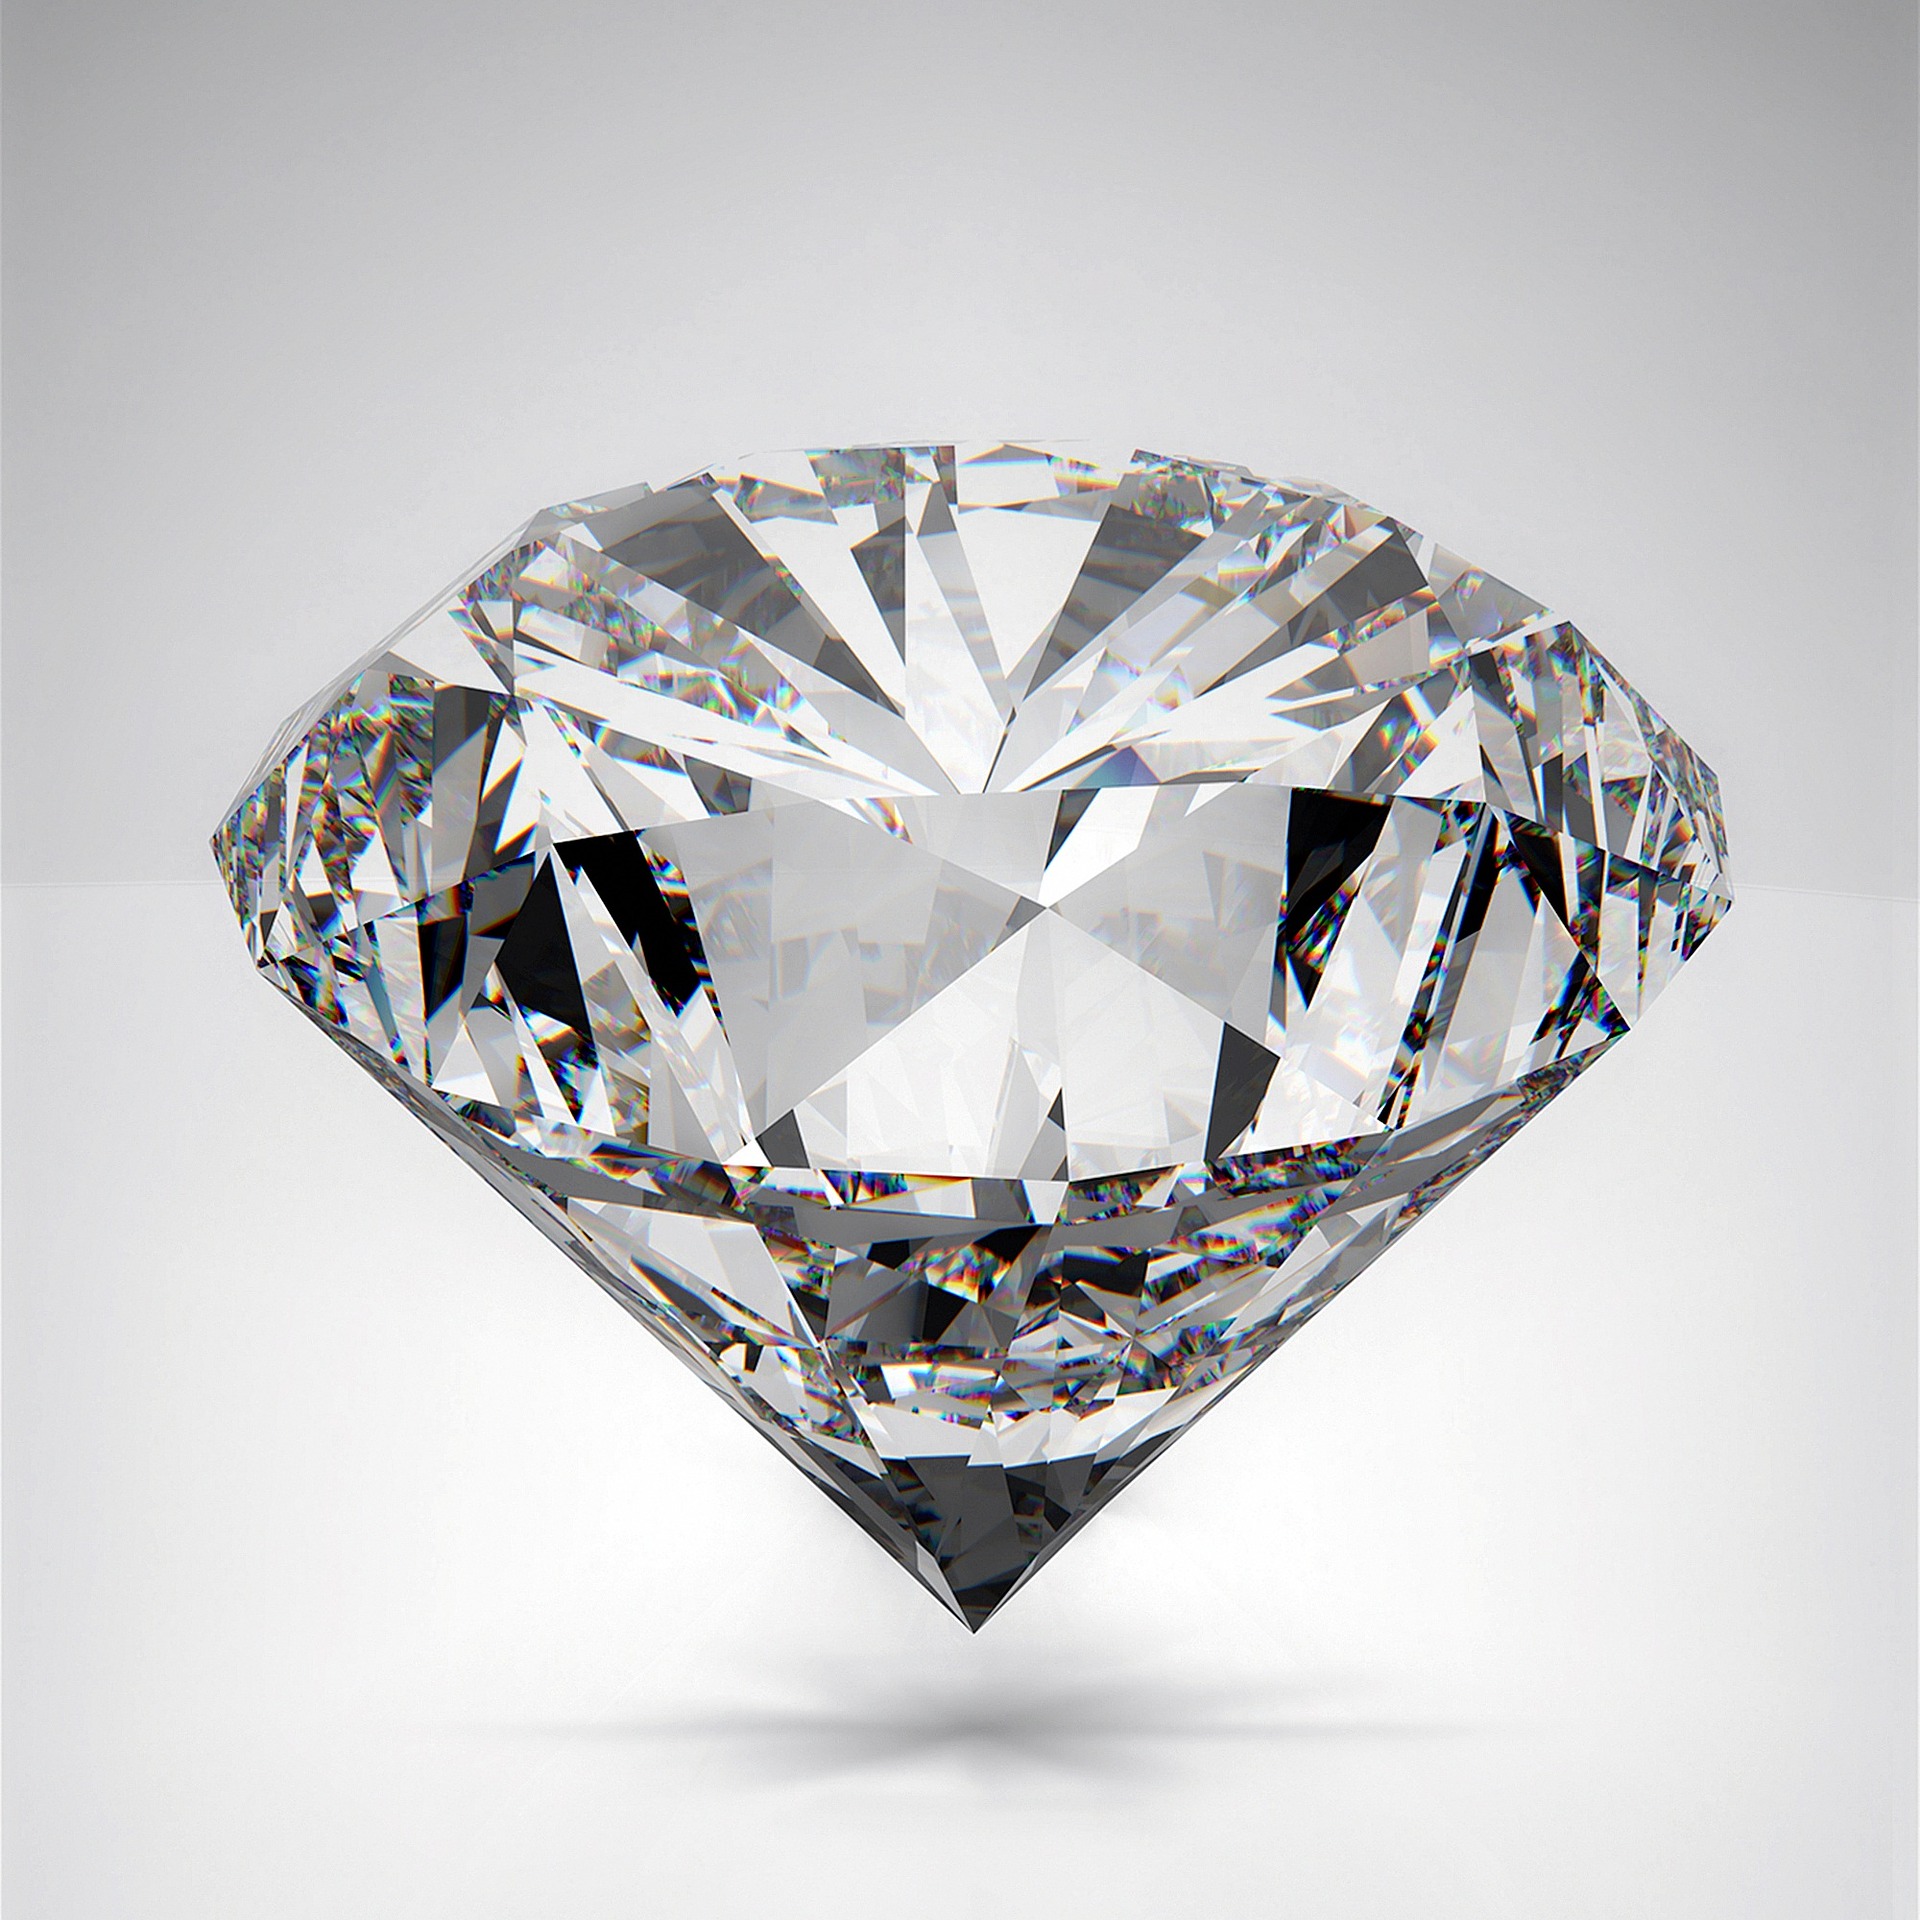 Does Lab Grown Diamonds Offer a More Sustainable Alternative?